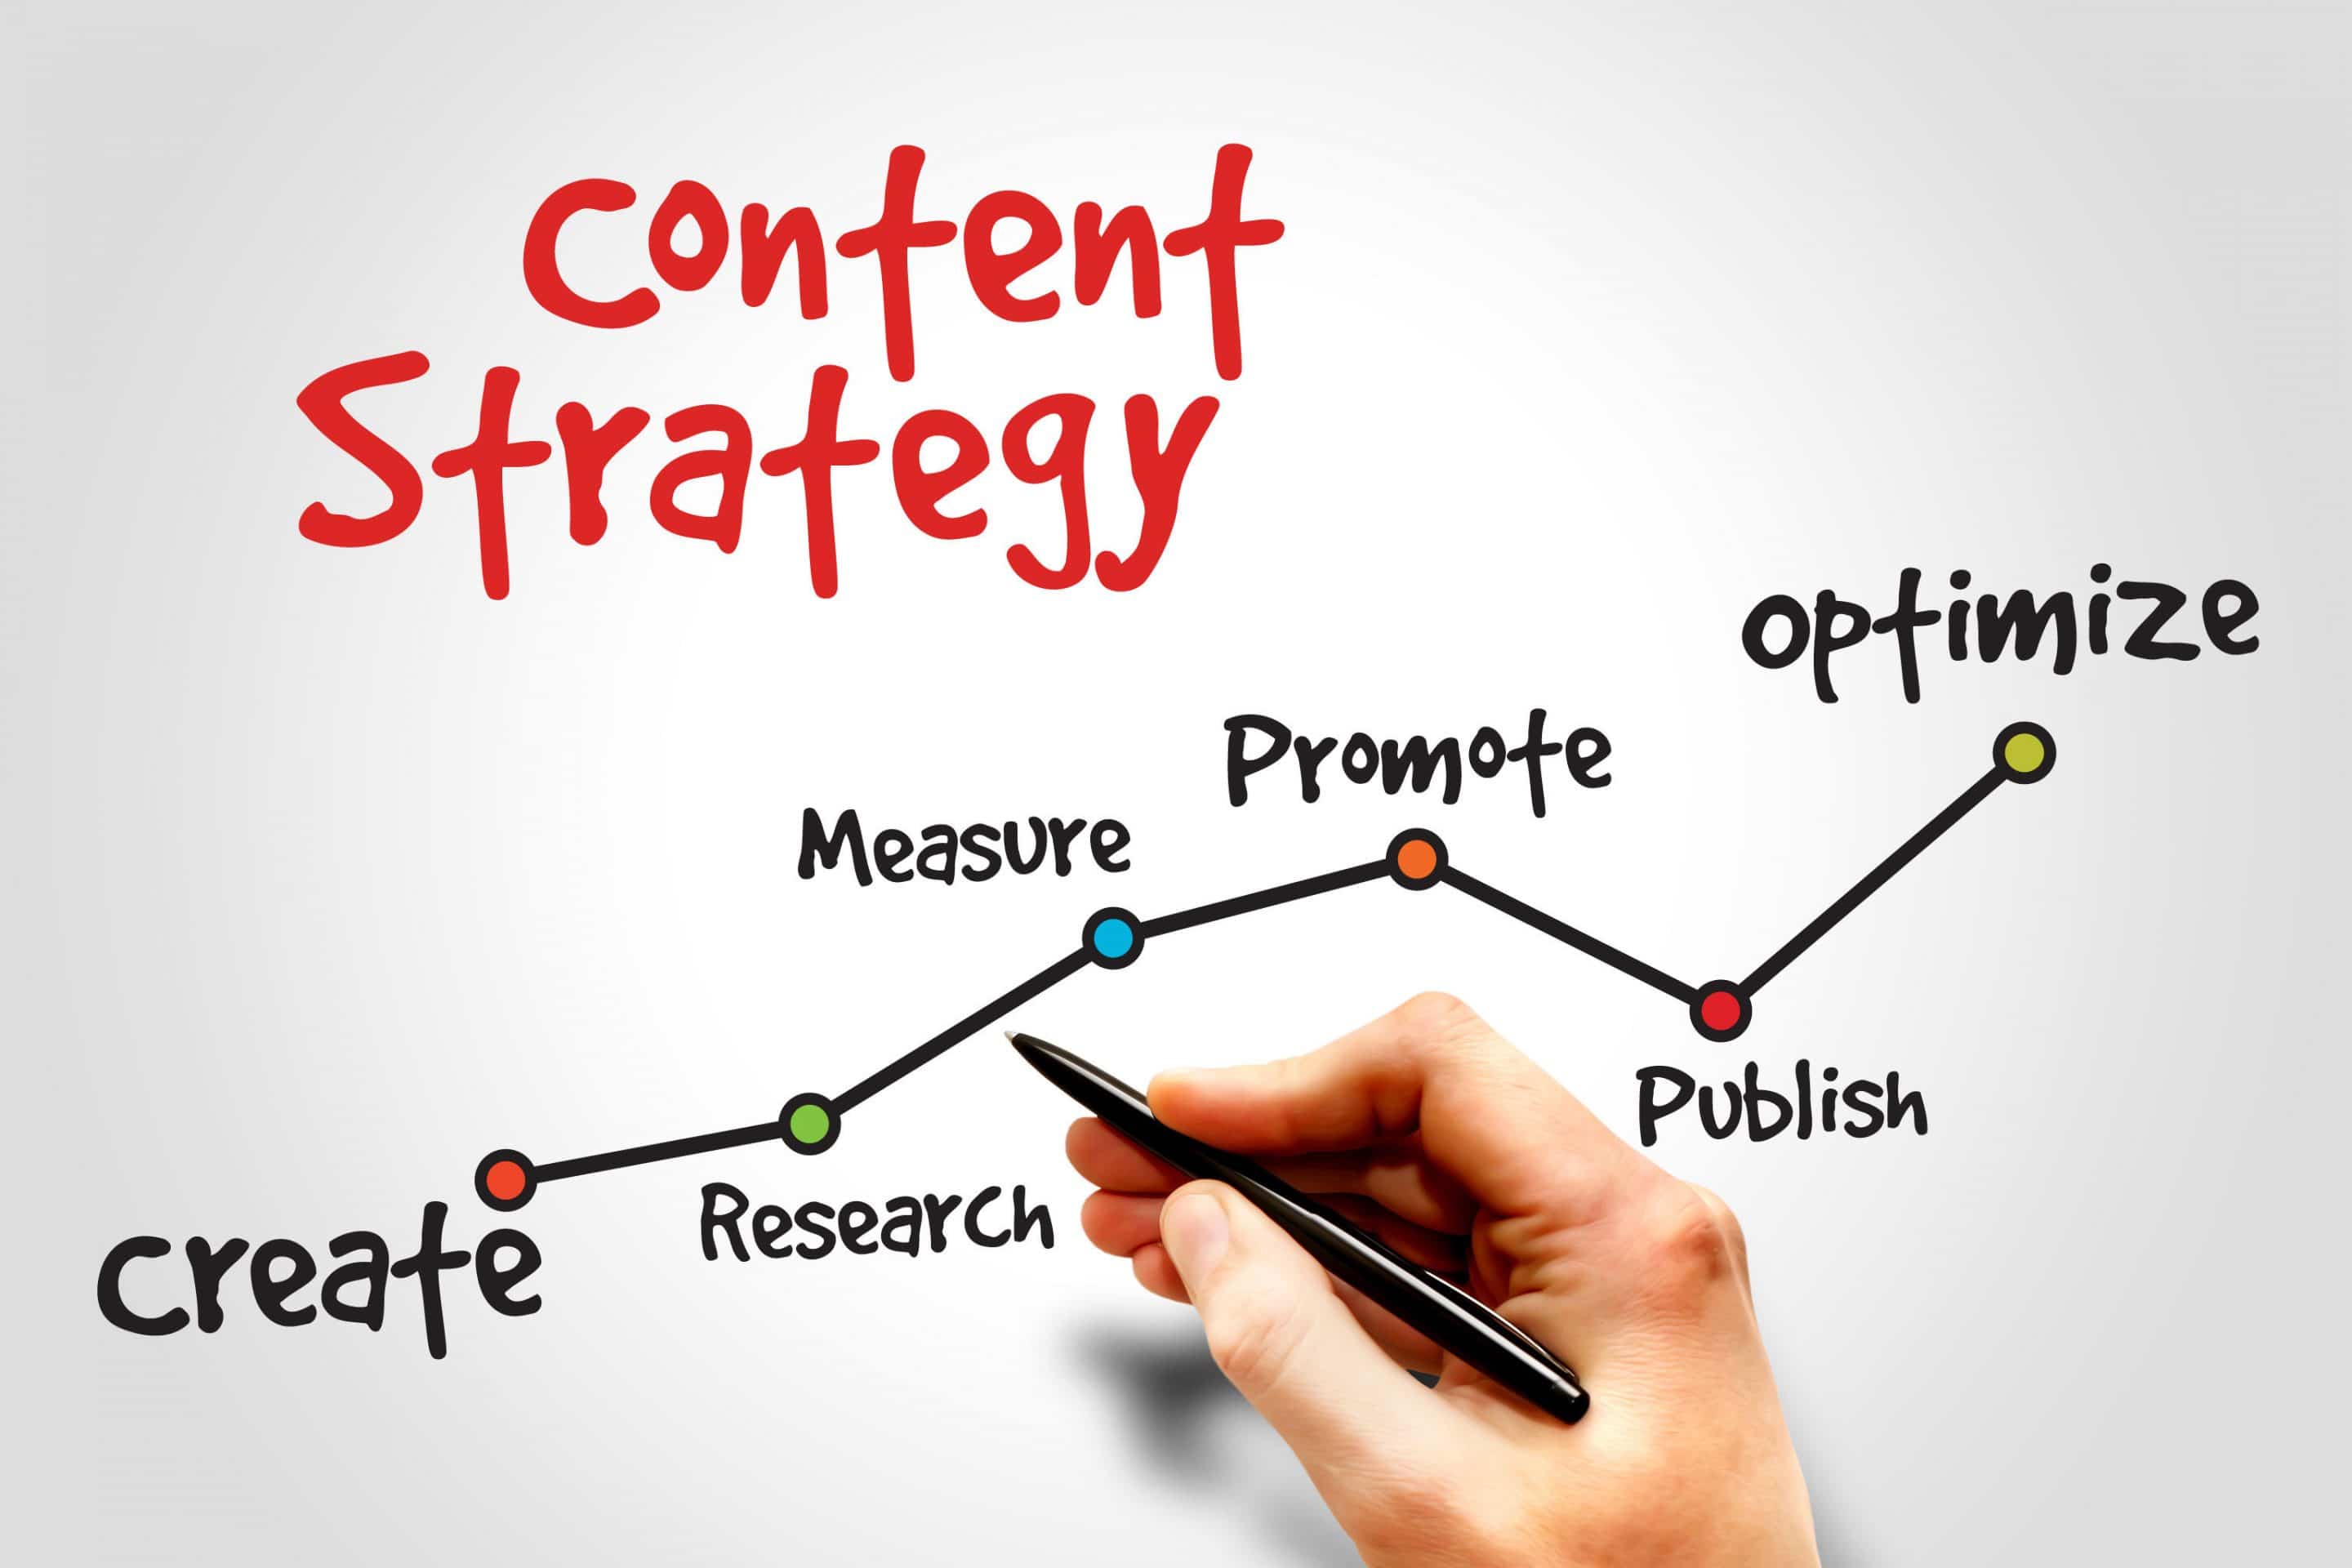 Content marketing strategy timeline.